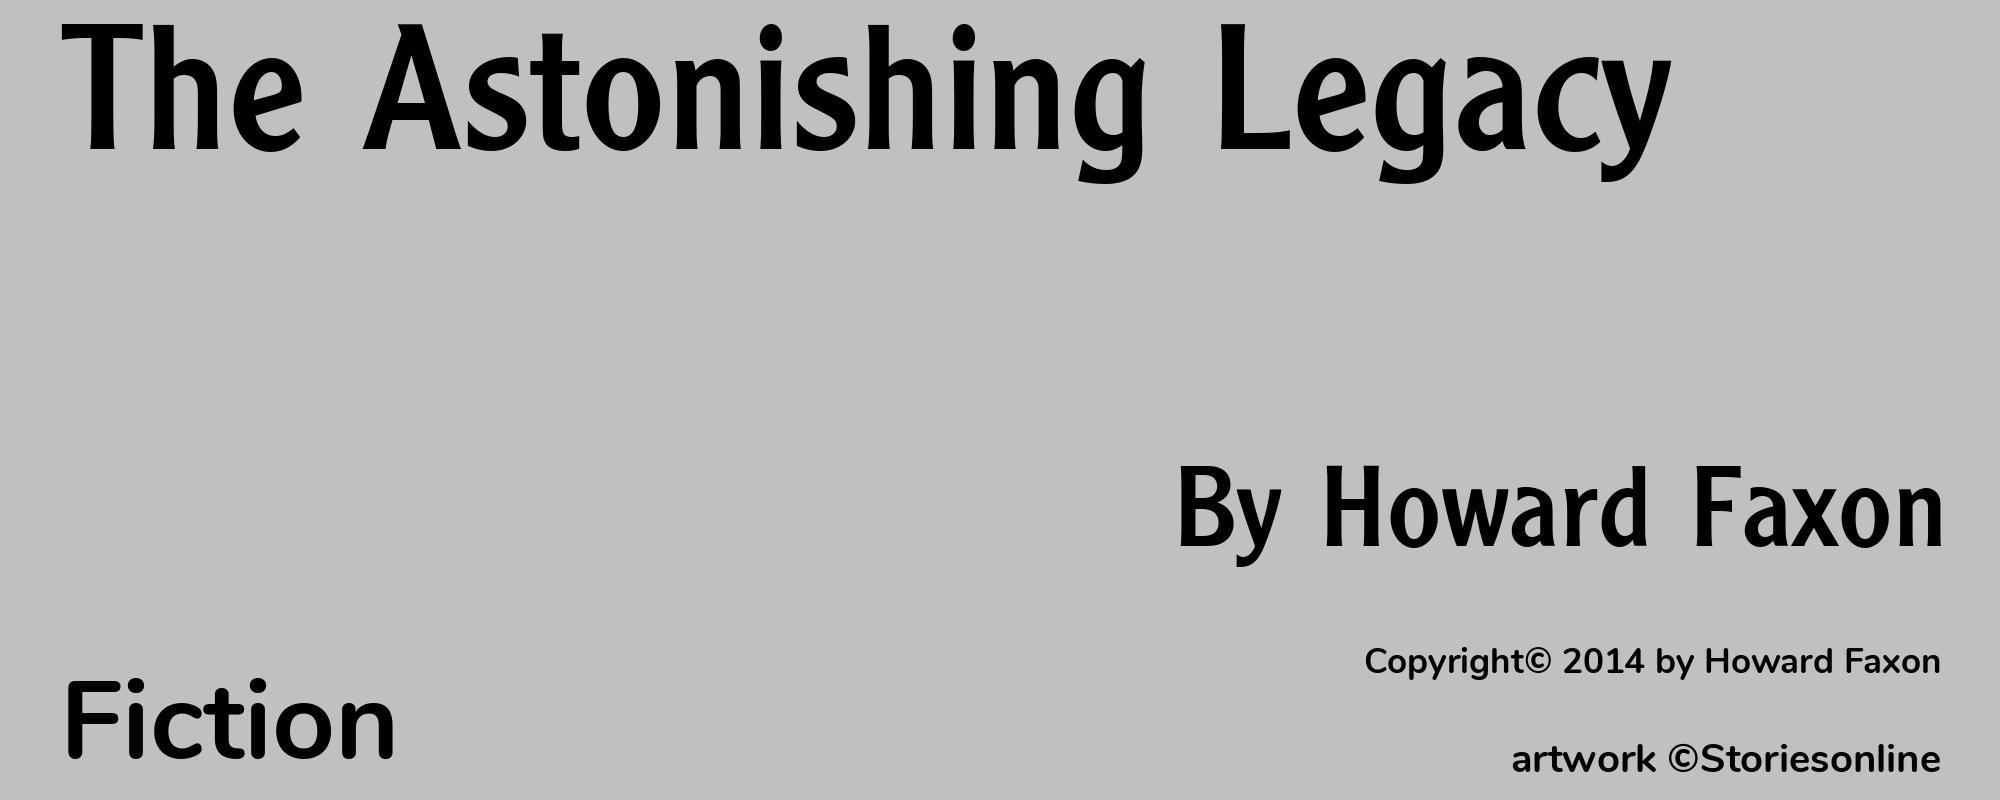 The Astonishing Legacy - Cover